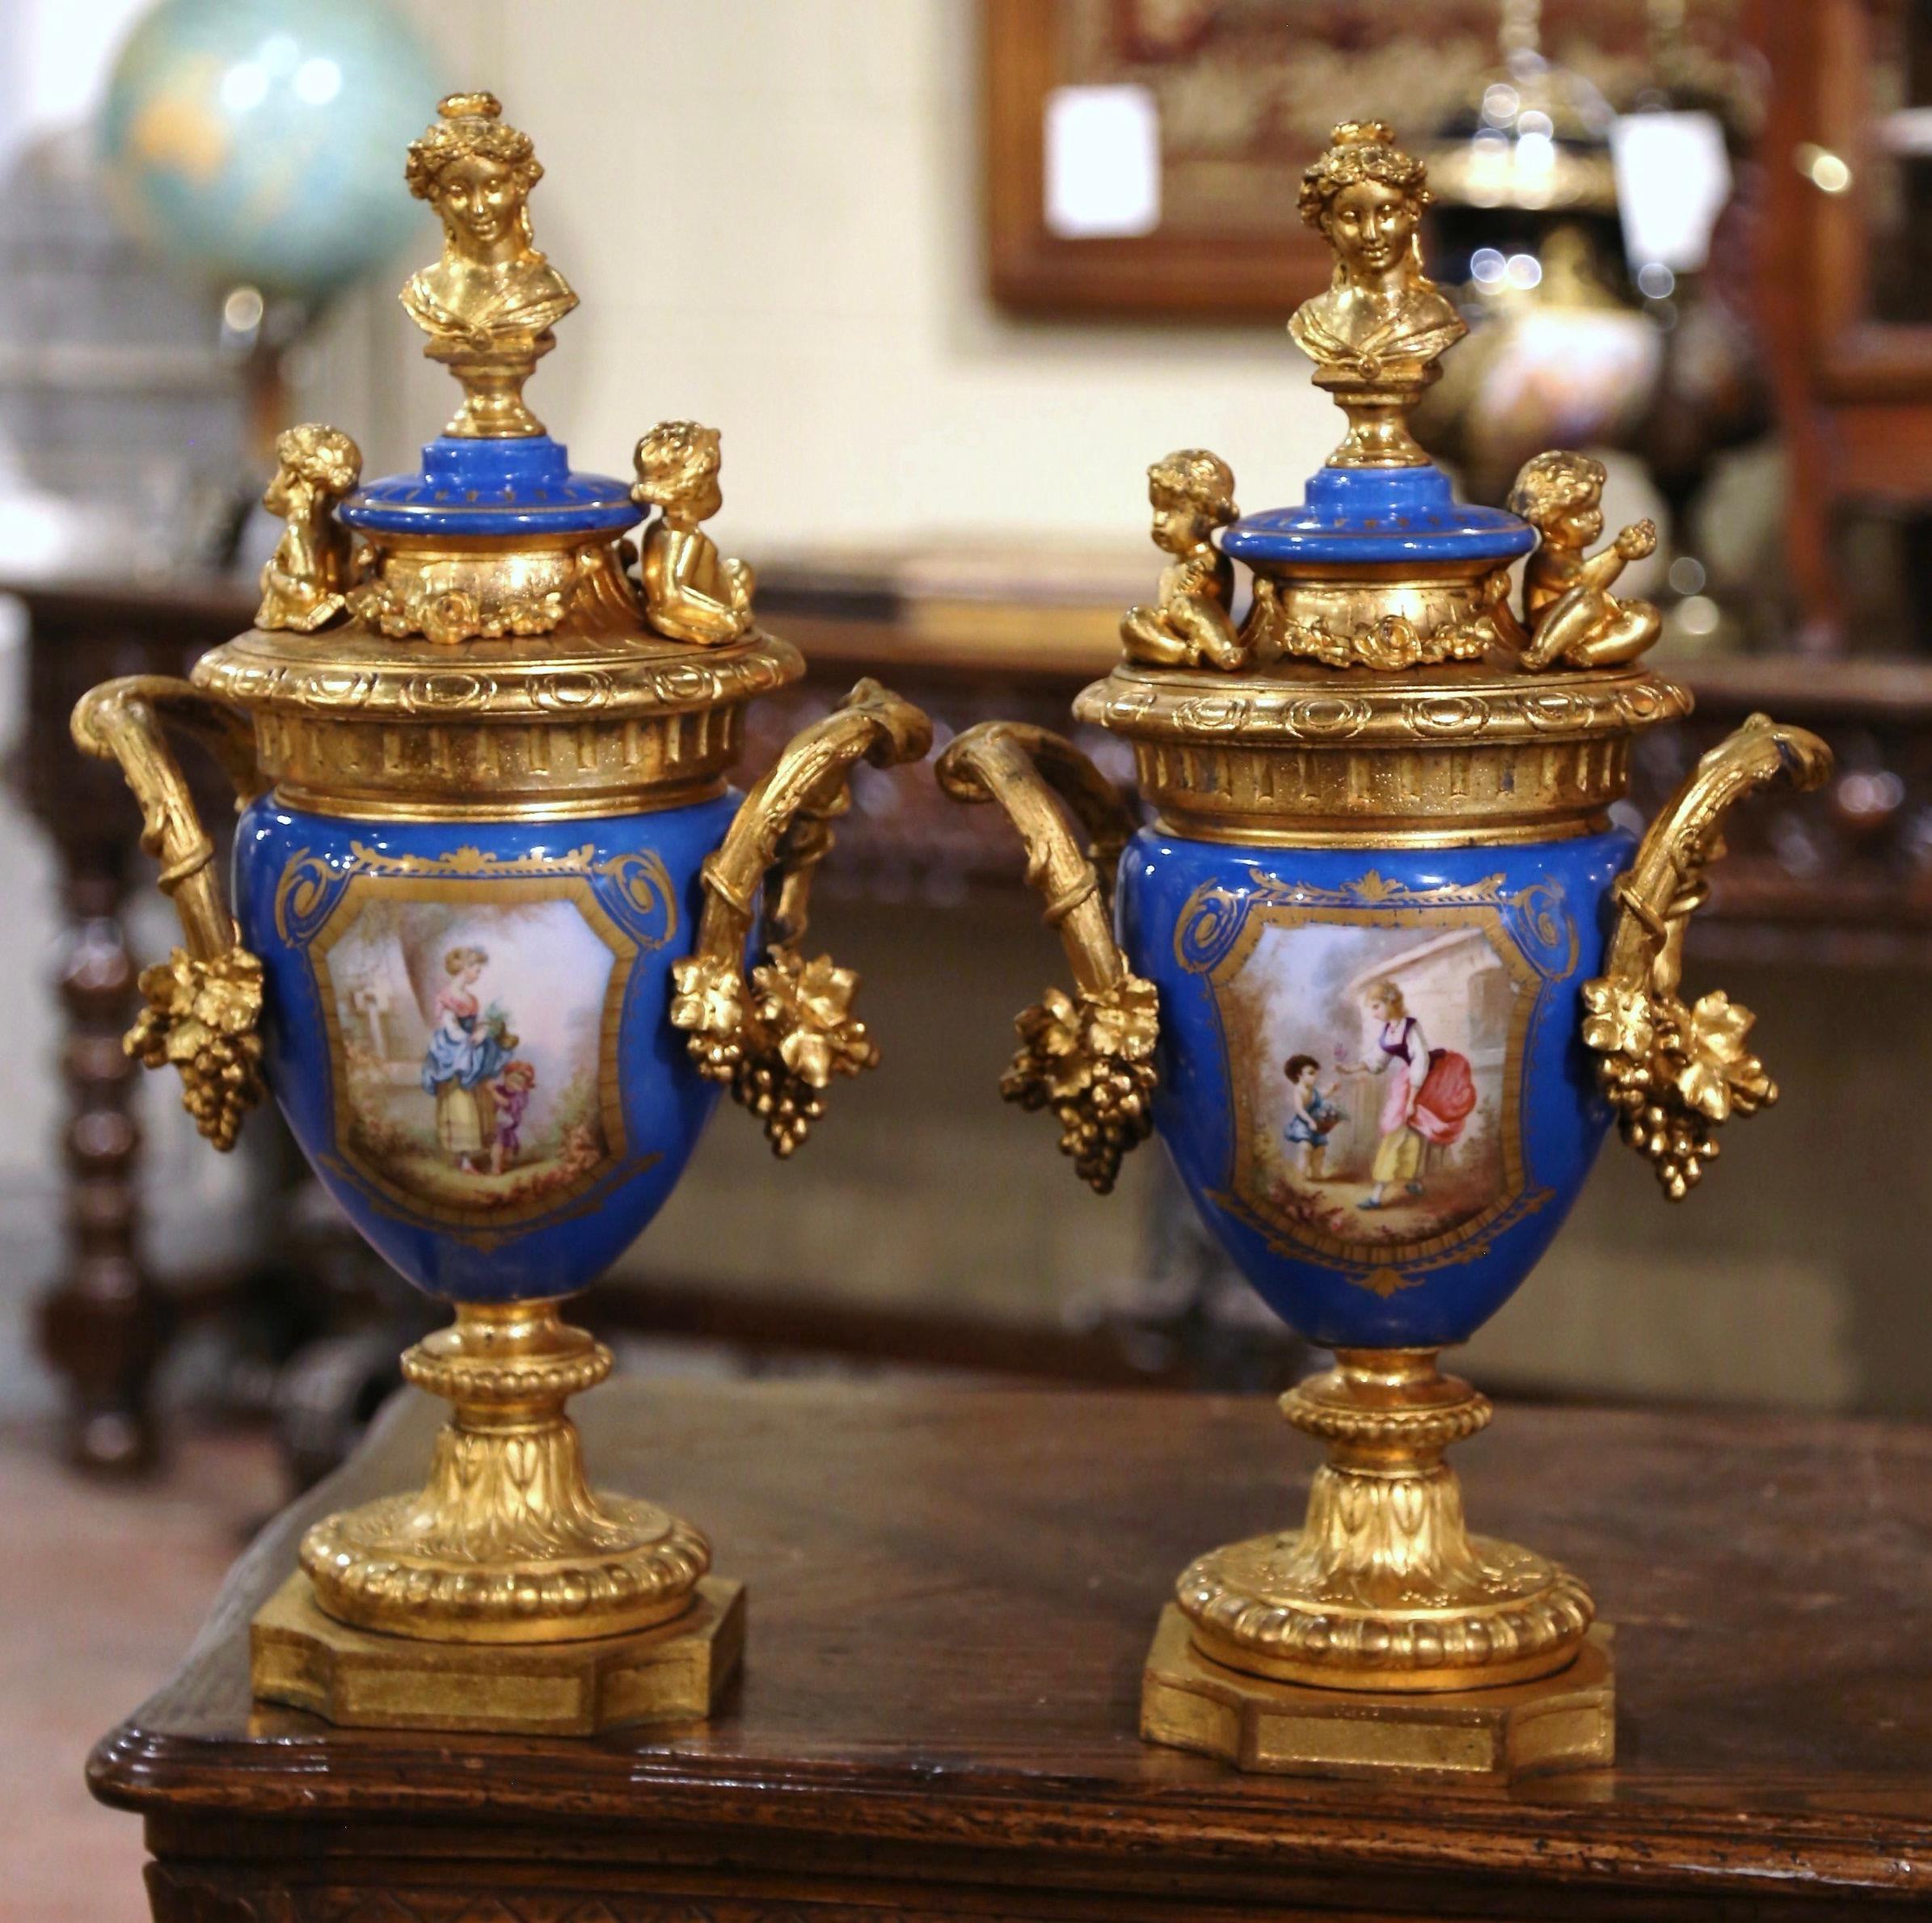 Pair of 19th Century French Blue Porcelain and Gilt Bronze Sèvres Urns Vases For Sale 2